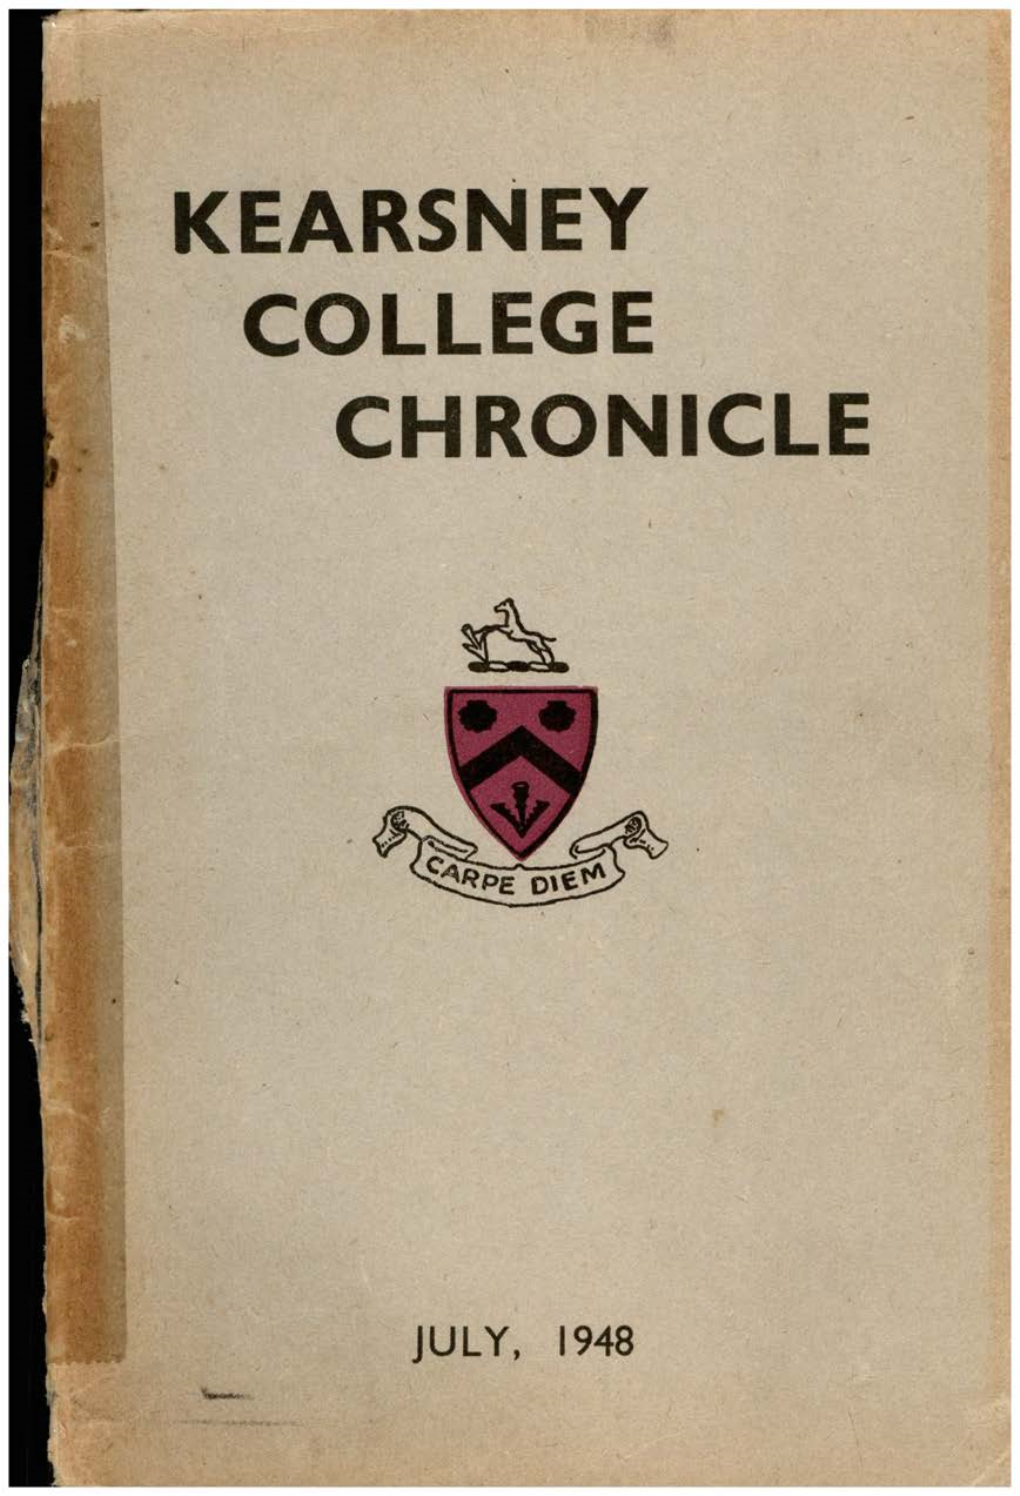 Chronicle for 1948